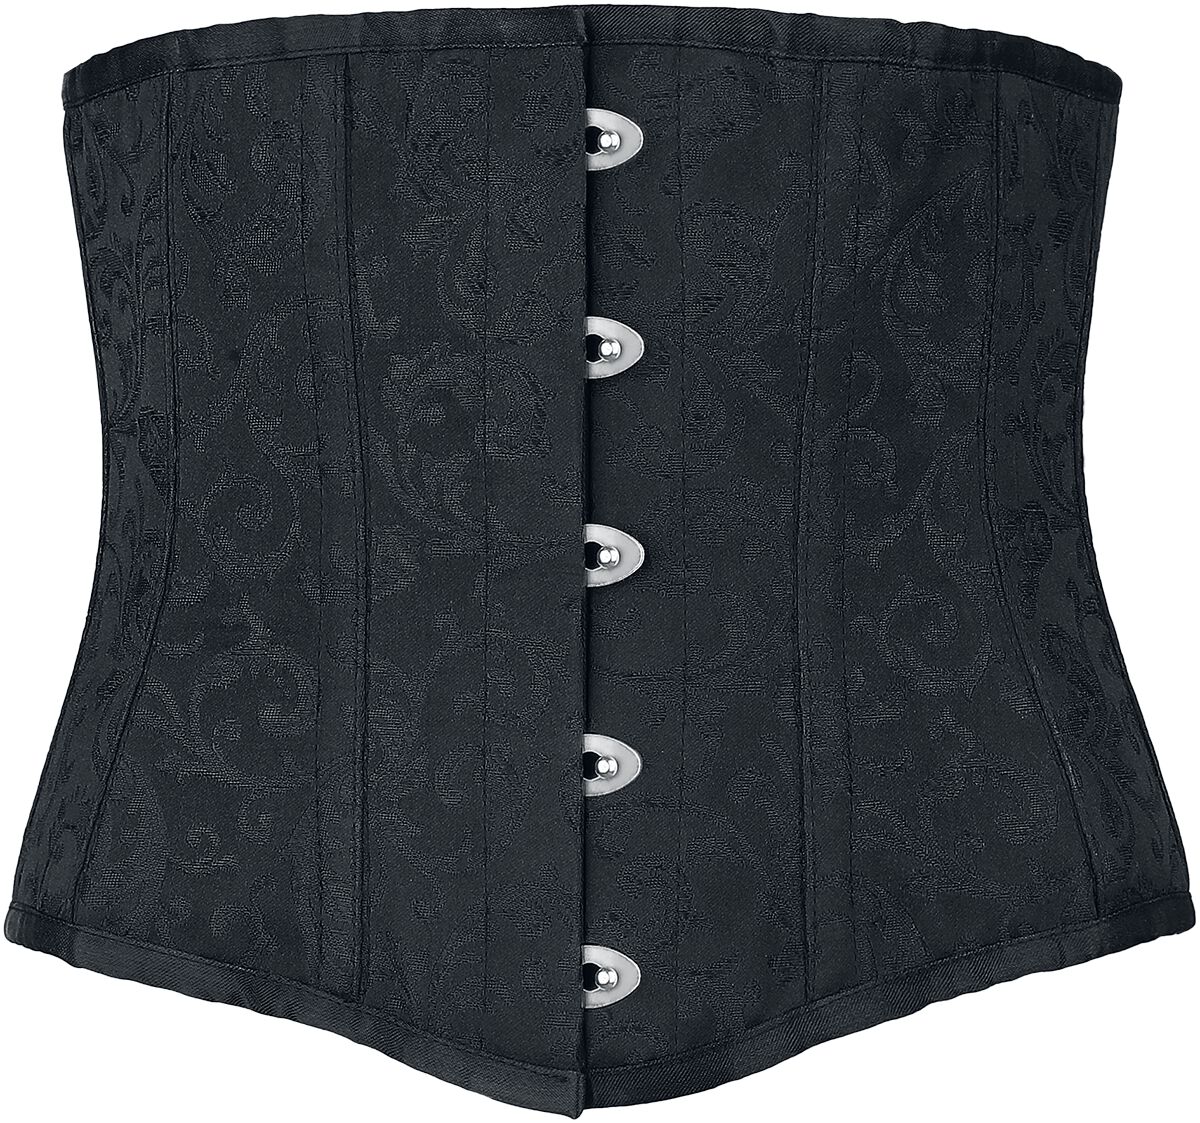 Under-bust corset with brocade pattern, Gothicana by EMP Corsage